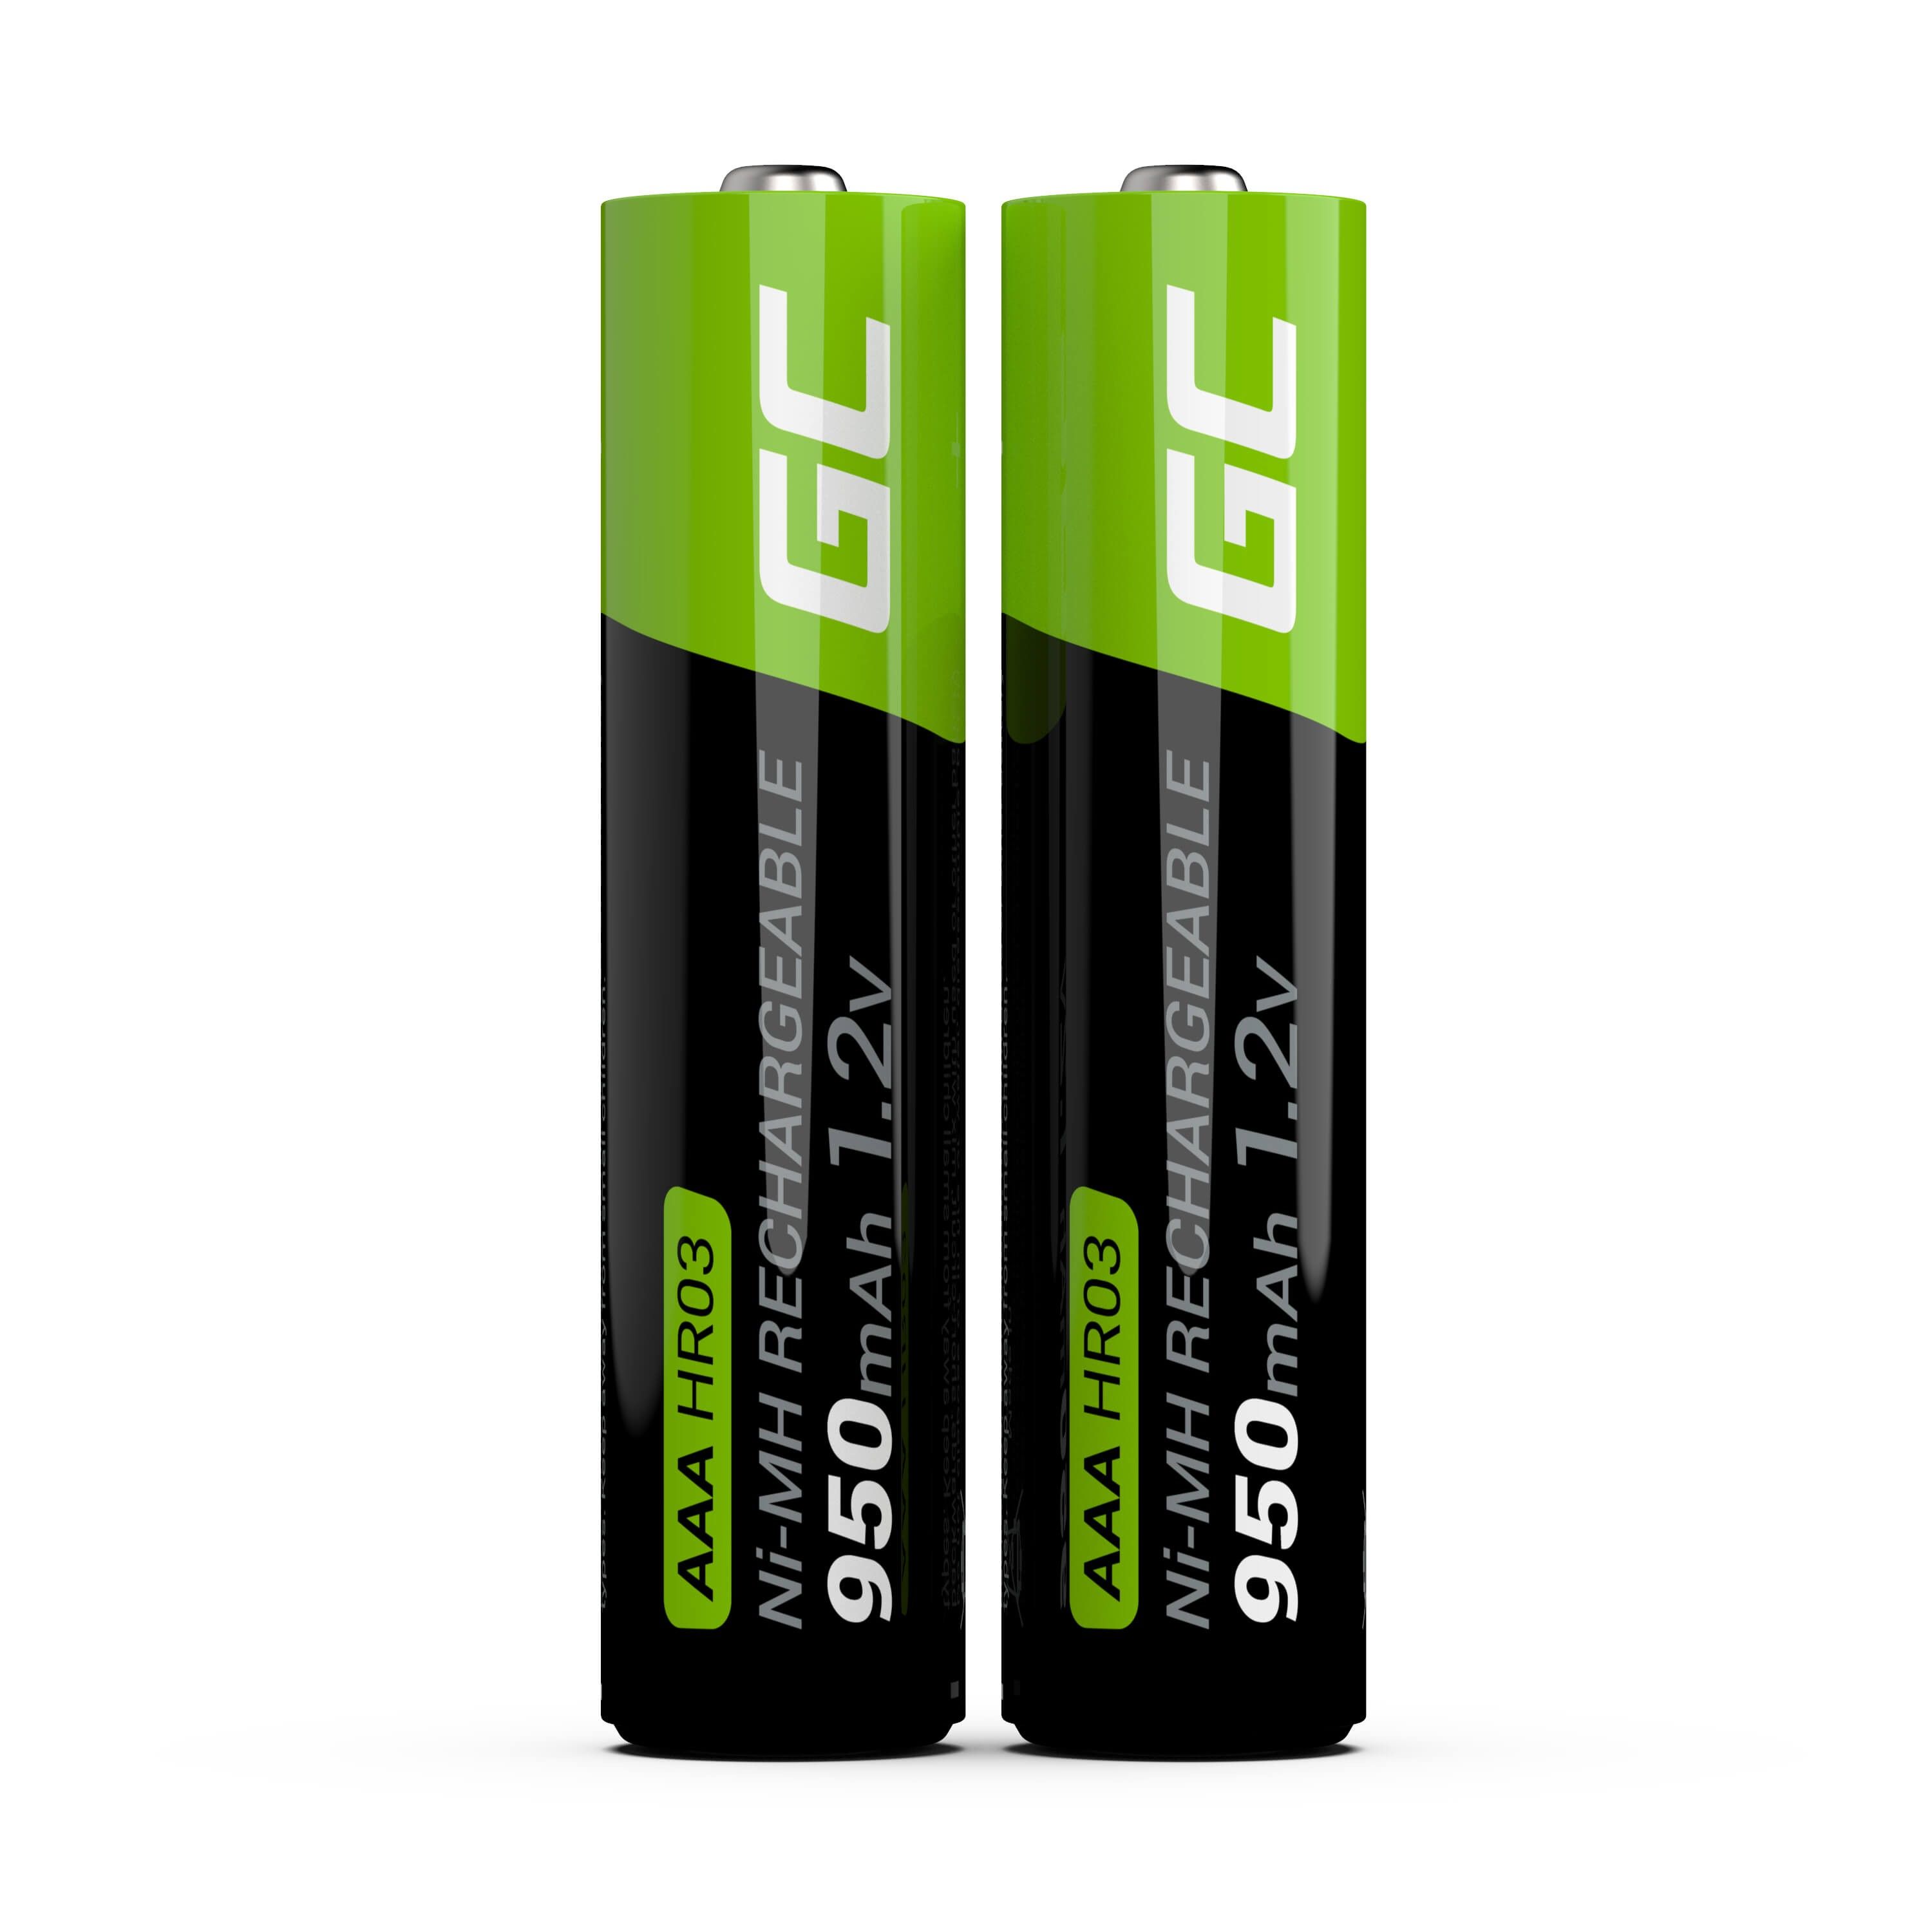 Green Cell GR07 household battery Rechargeable battery AAA Nickel-Metal Hydride (NiMH) 2X AAA R3 950MAH_2